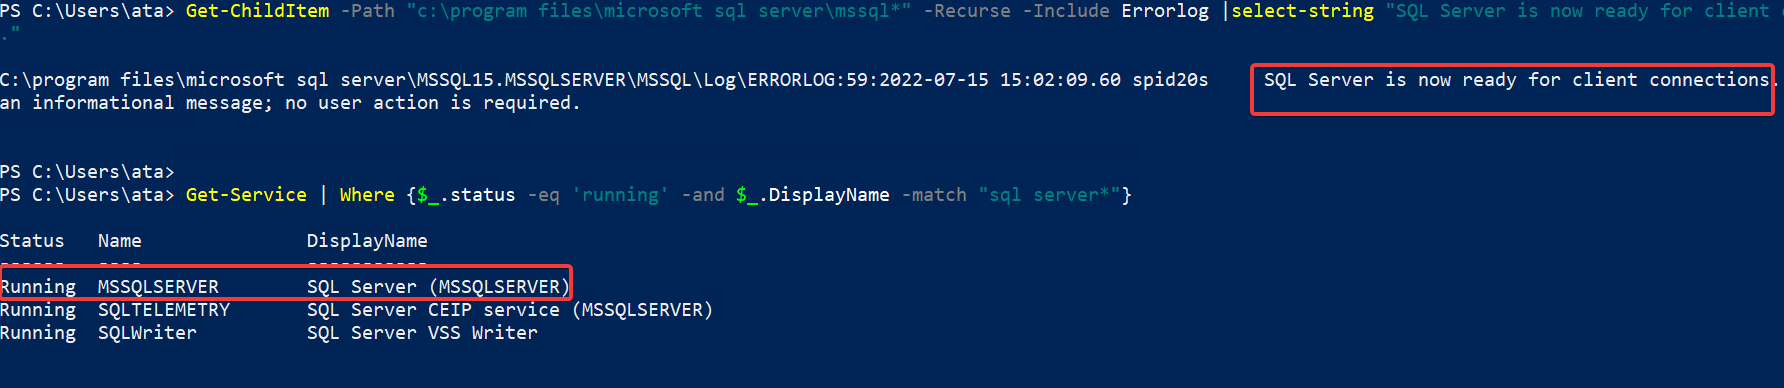 Verifying the SQL Server instance is running